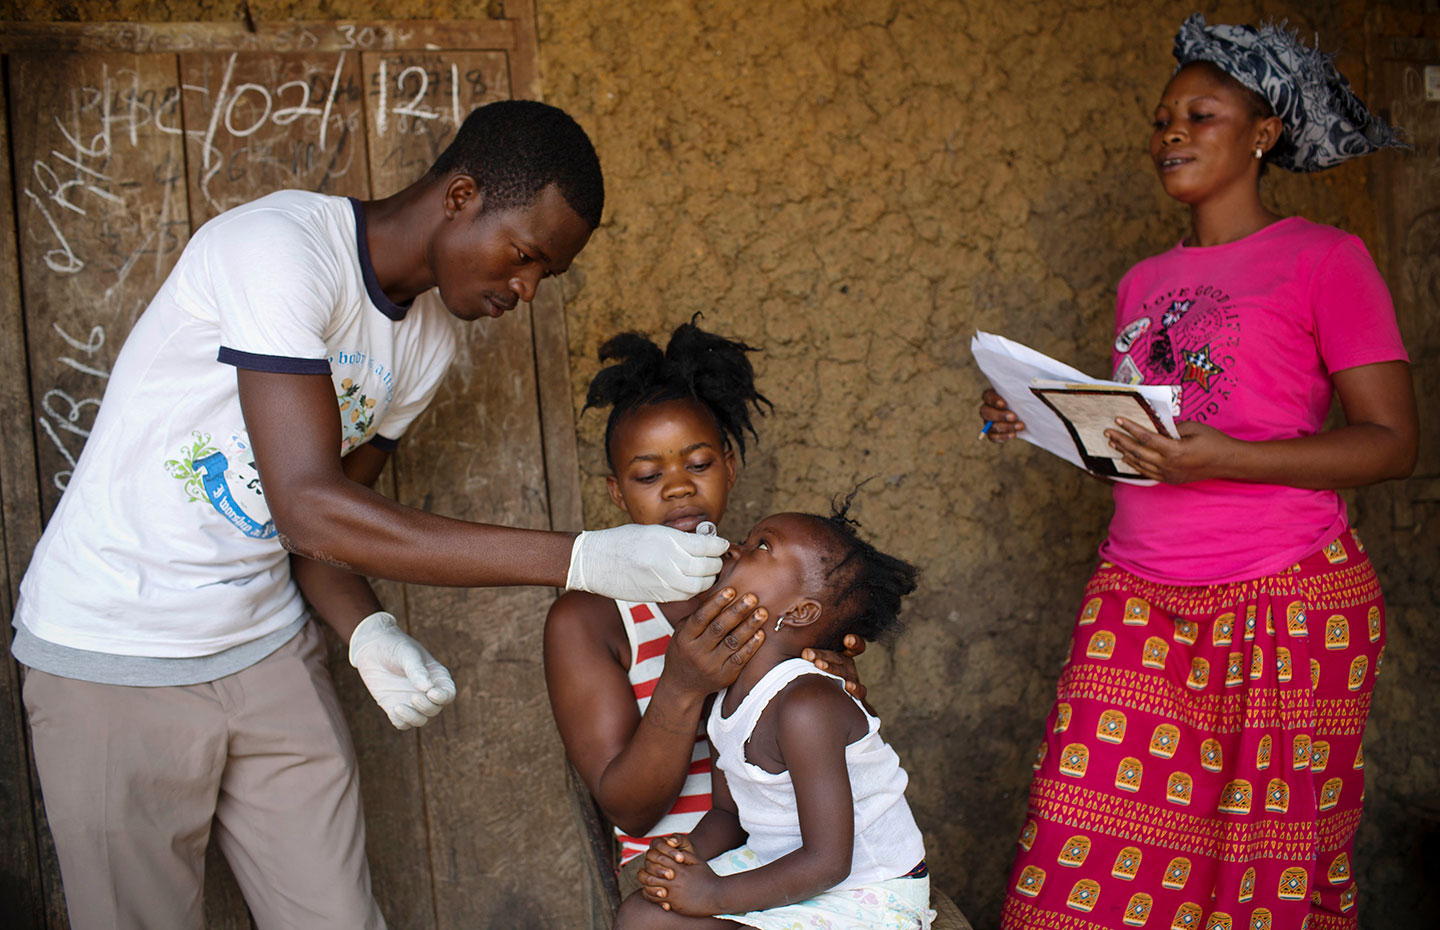 A health worker administers an oral polio vaccination dose to a child in the Kenema District of Sierra Leone. Credit: Gavi/2016/Kate Holt.